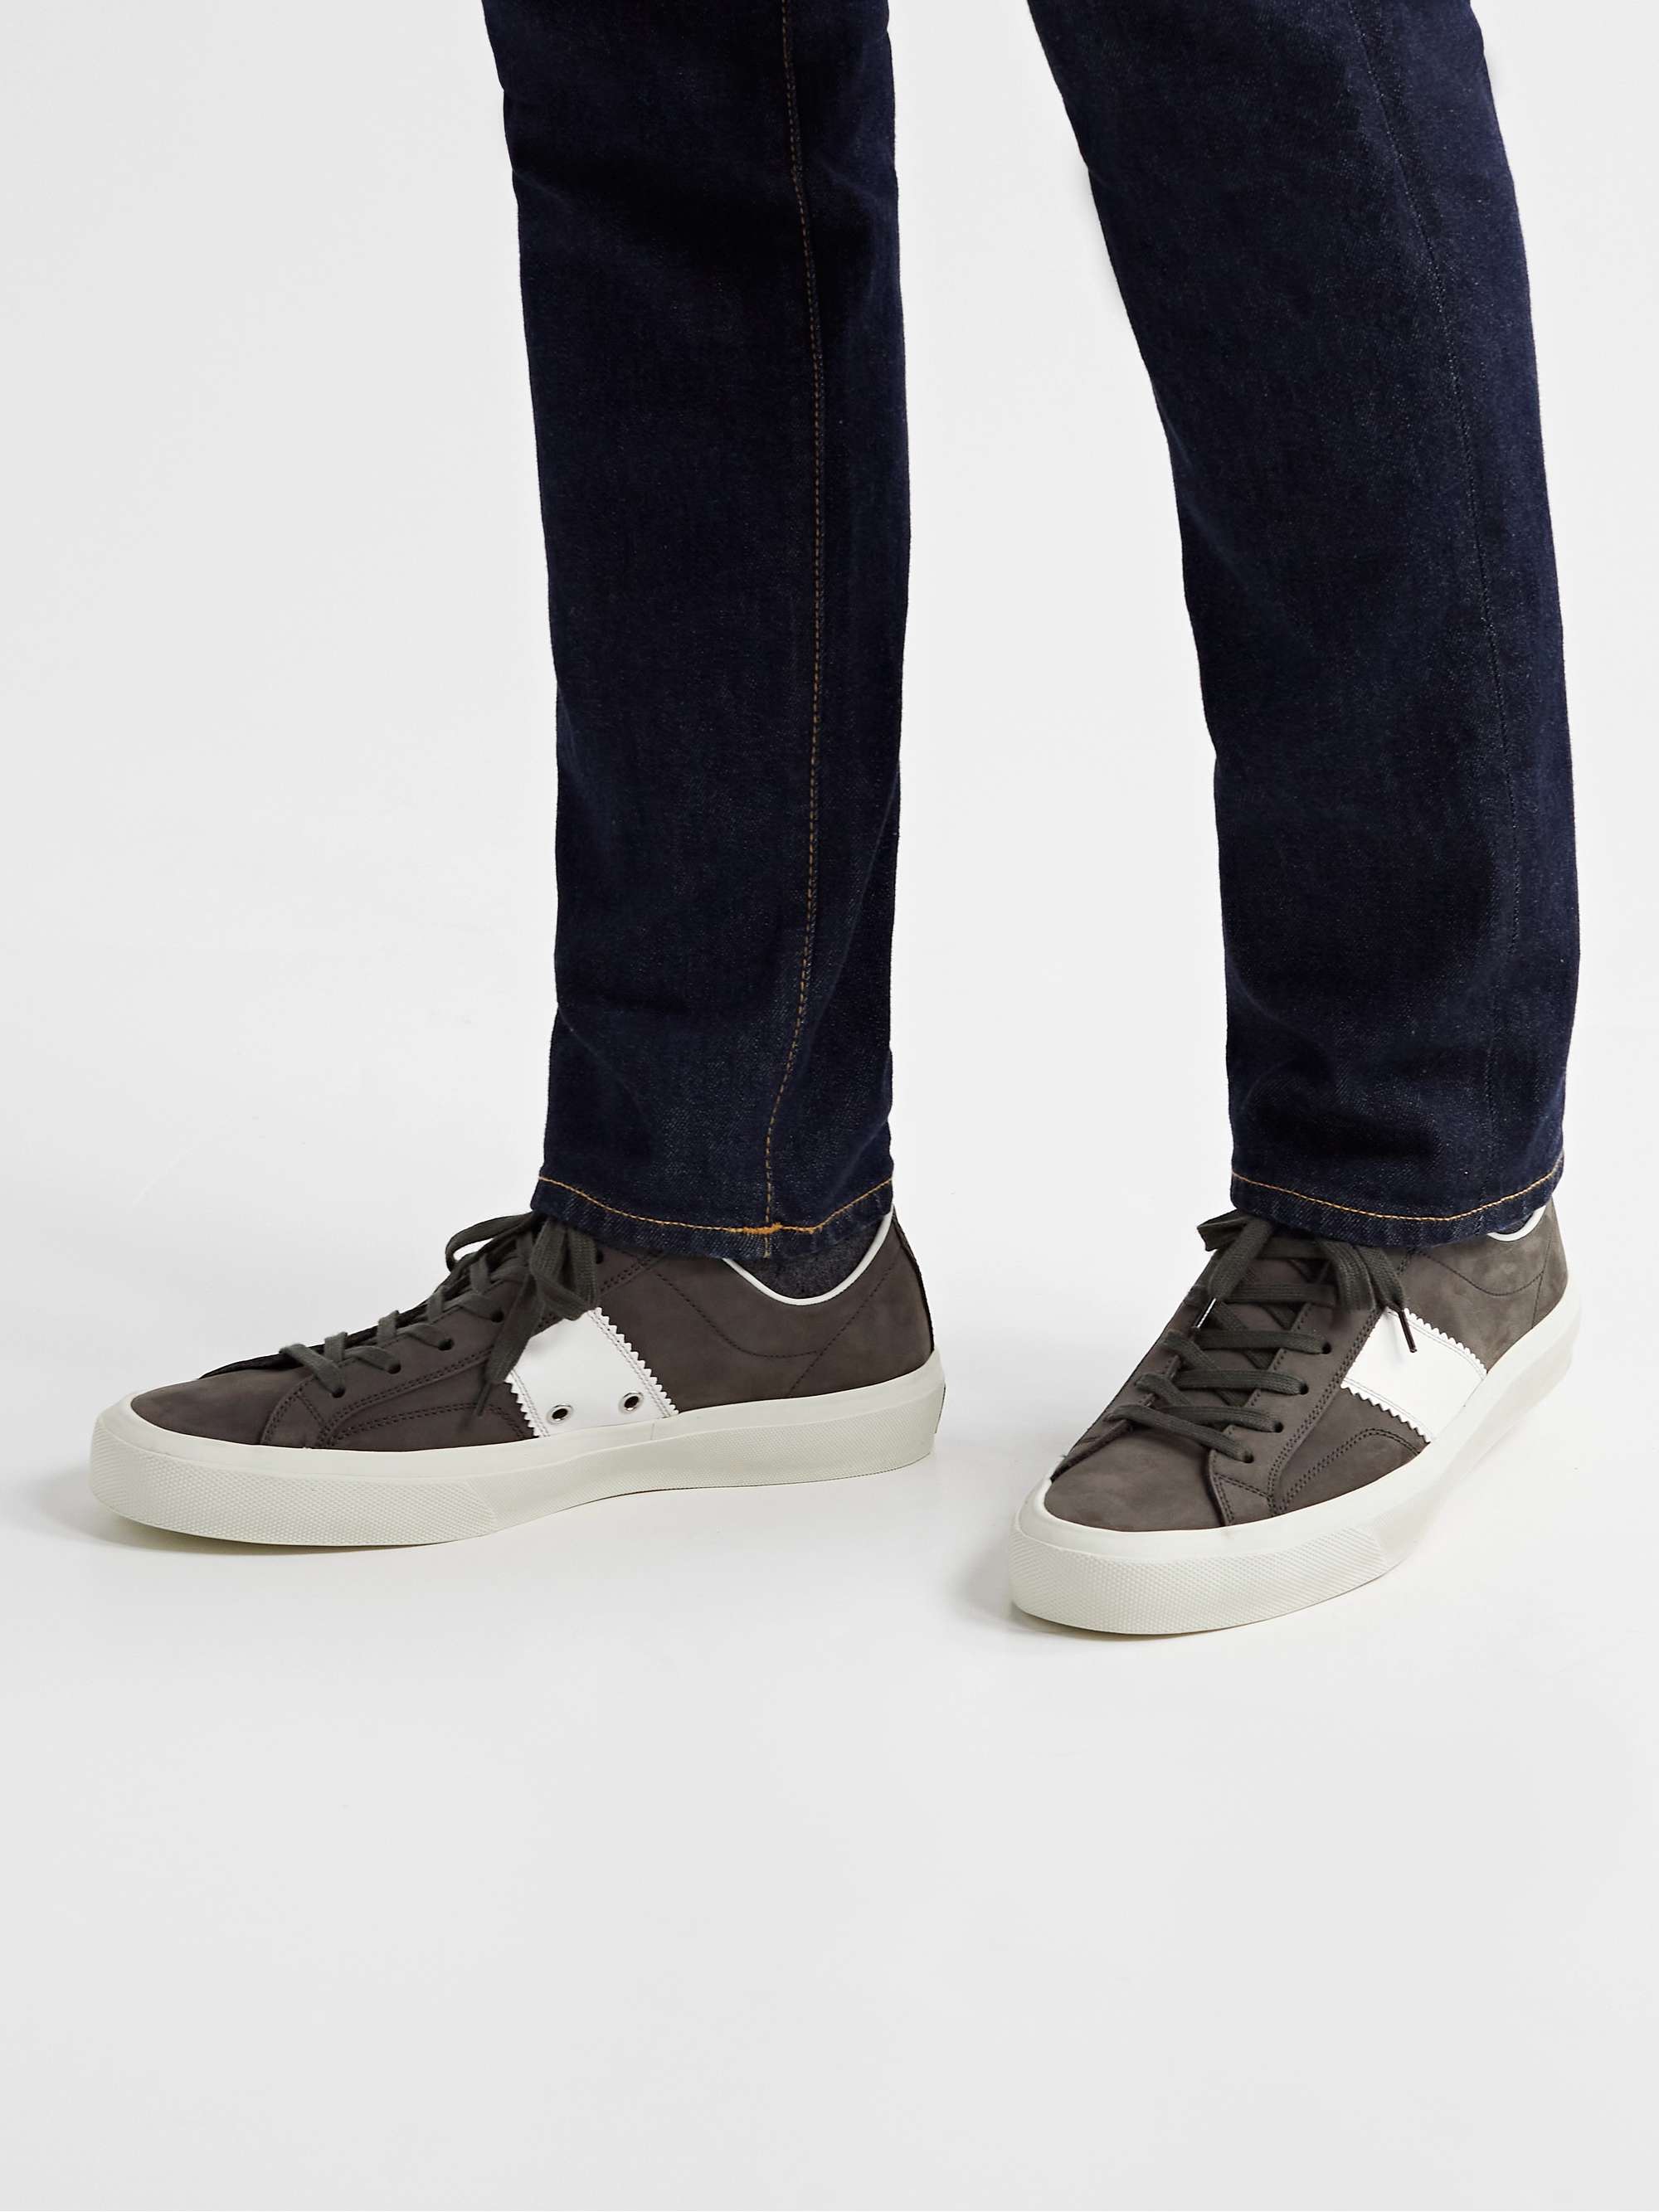 TOM FORD Cambridge Leather-Trimmed Nubuck Sneakers